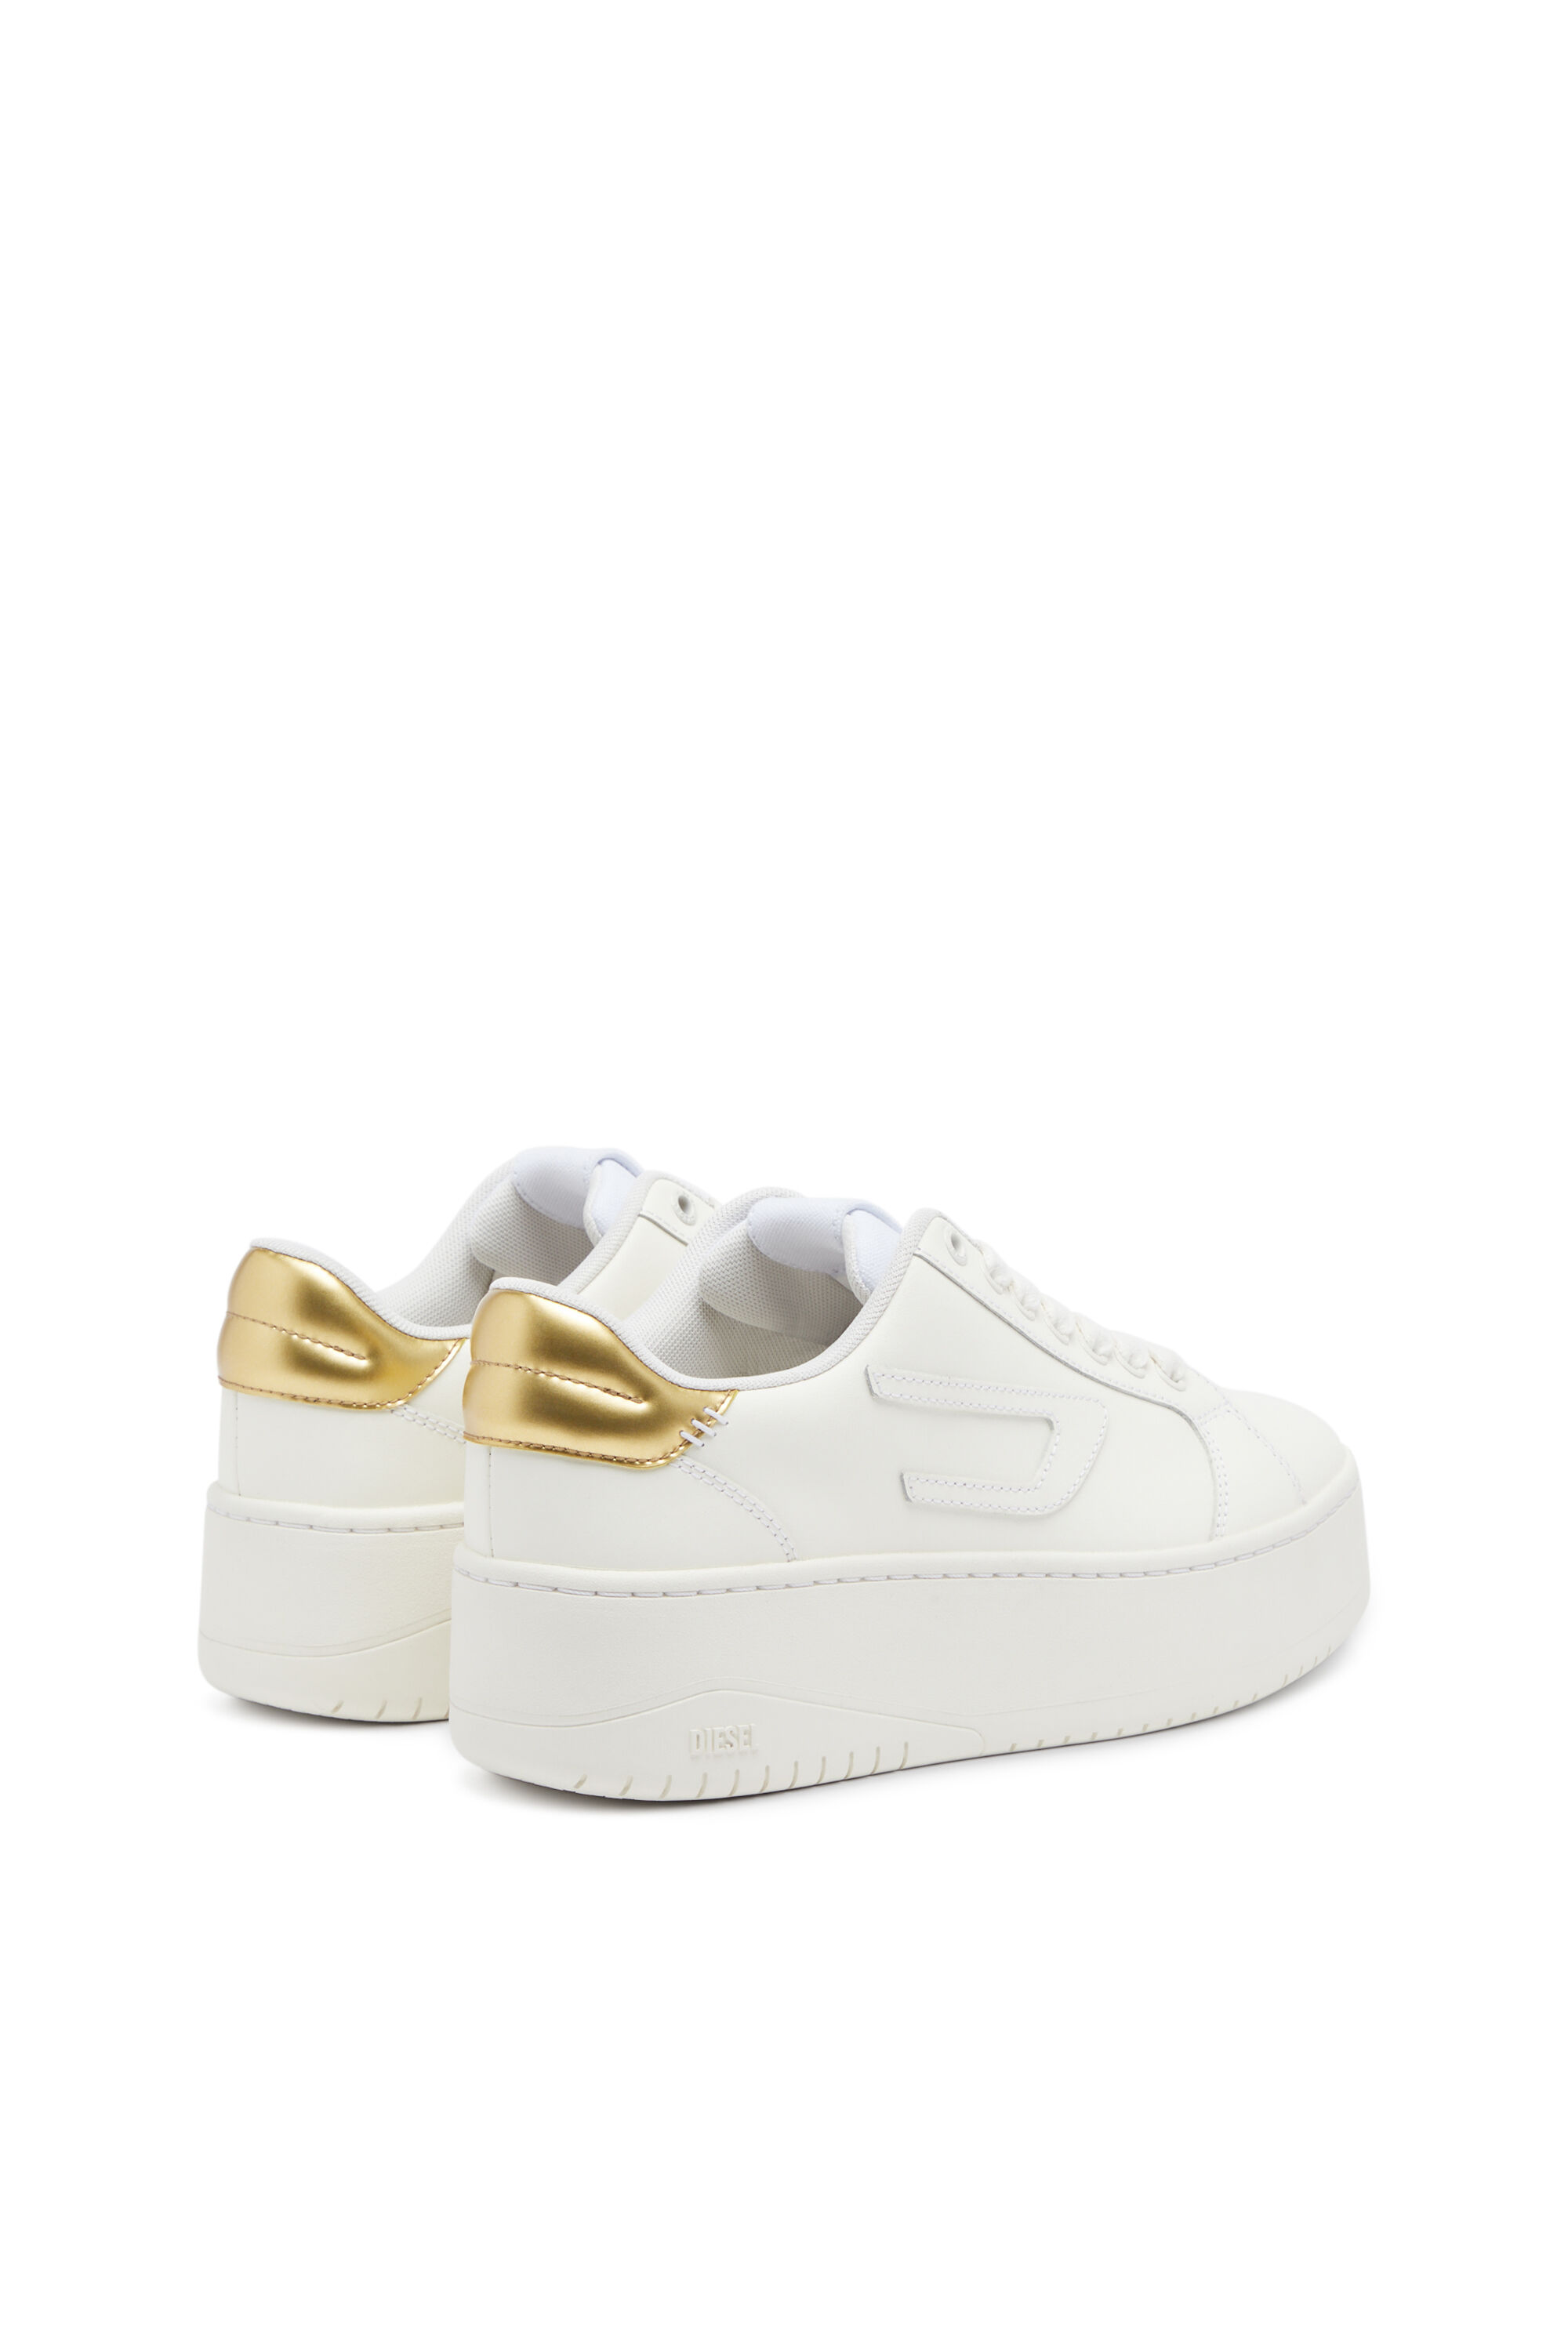 Diesel - S-ATHENE BOLD W, Woman S-Athene Bold-Low-top sneakers with flatform sole in Oro - Image 3